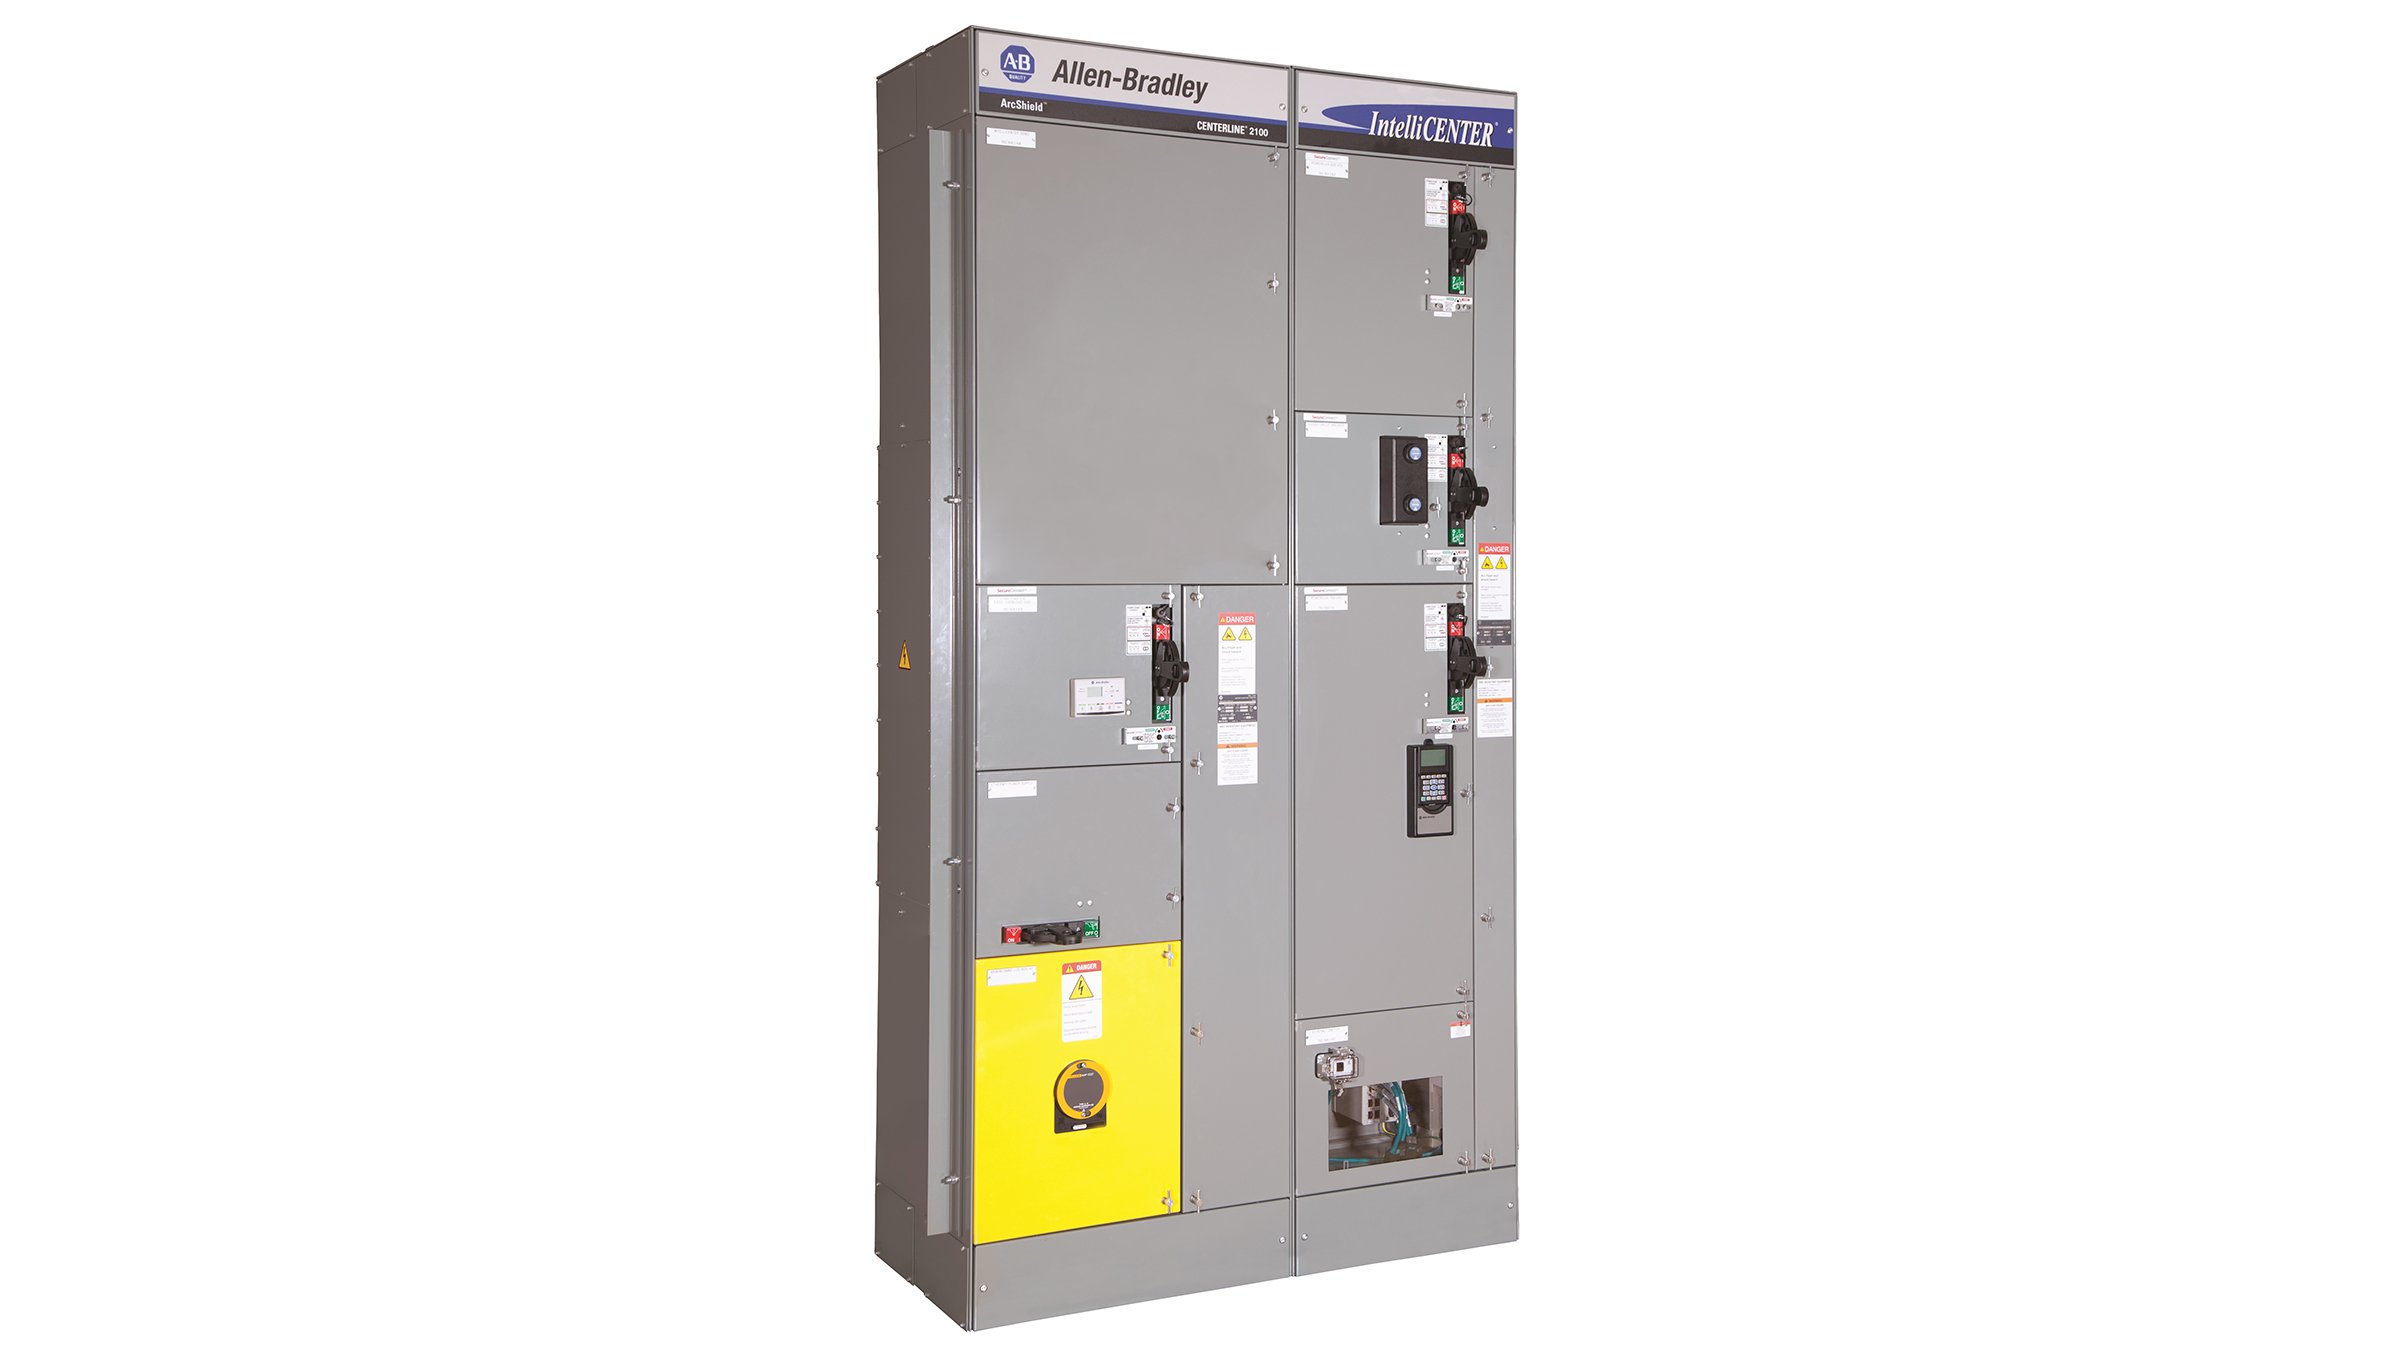 Tall gray industrial cabinet featuring 10 sections. Seven sections contain door handles, push-buttons keypads or windows to see or access the electrical components inside. One bright yellow section features a high voltage danger sticker